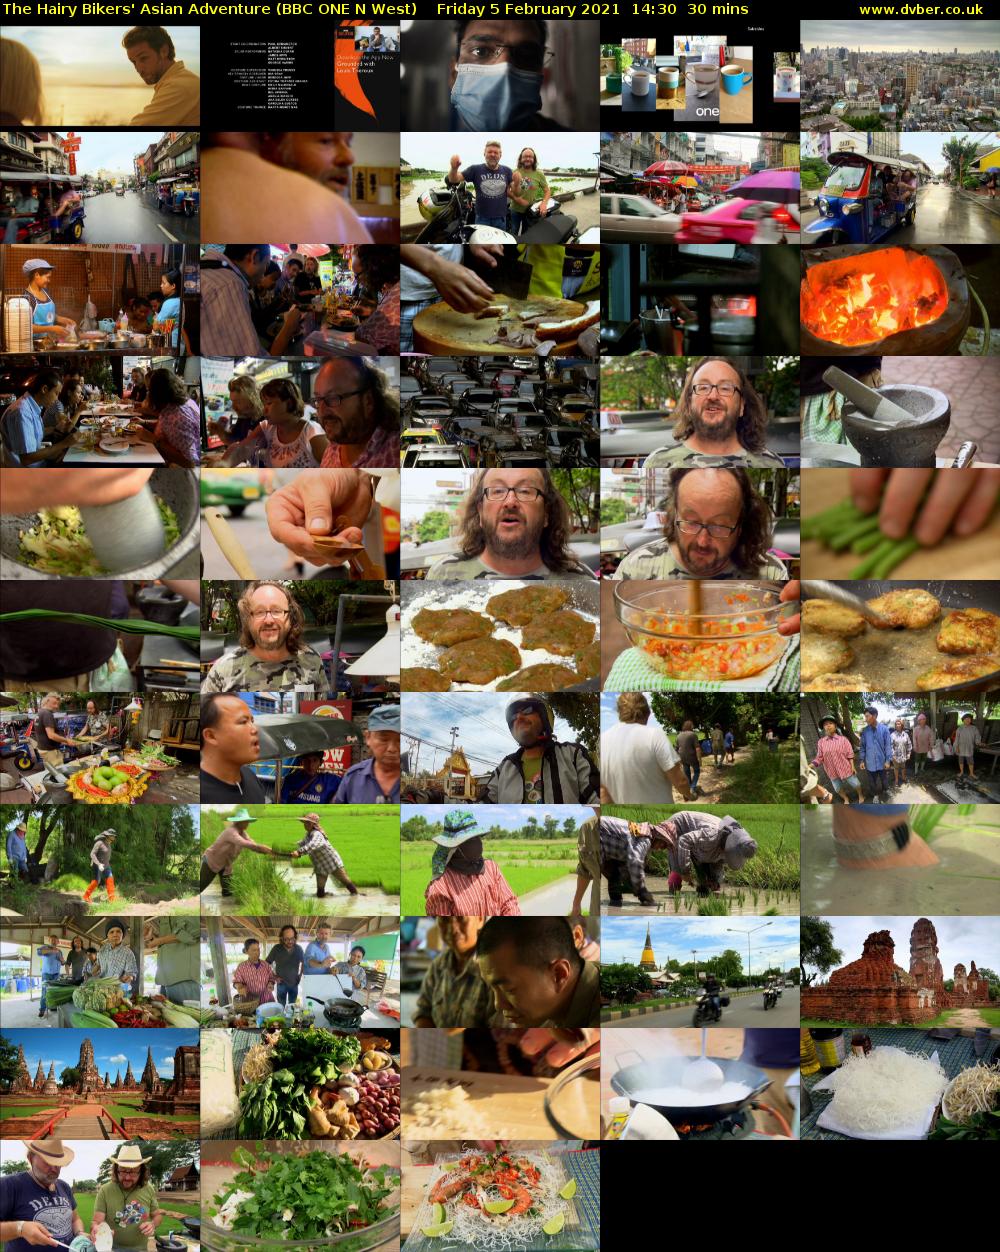 The Hairy Bikers' Asian Adventure (BBC ONE N West) Friday 5 February 2021 14:30 - 15:00